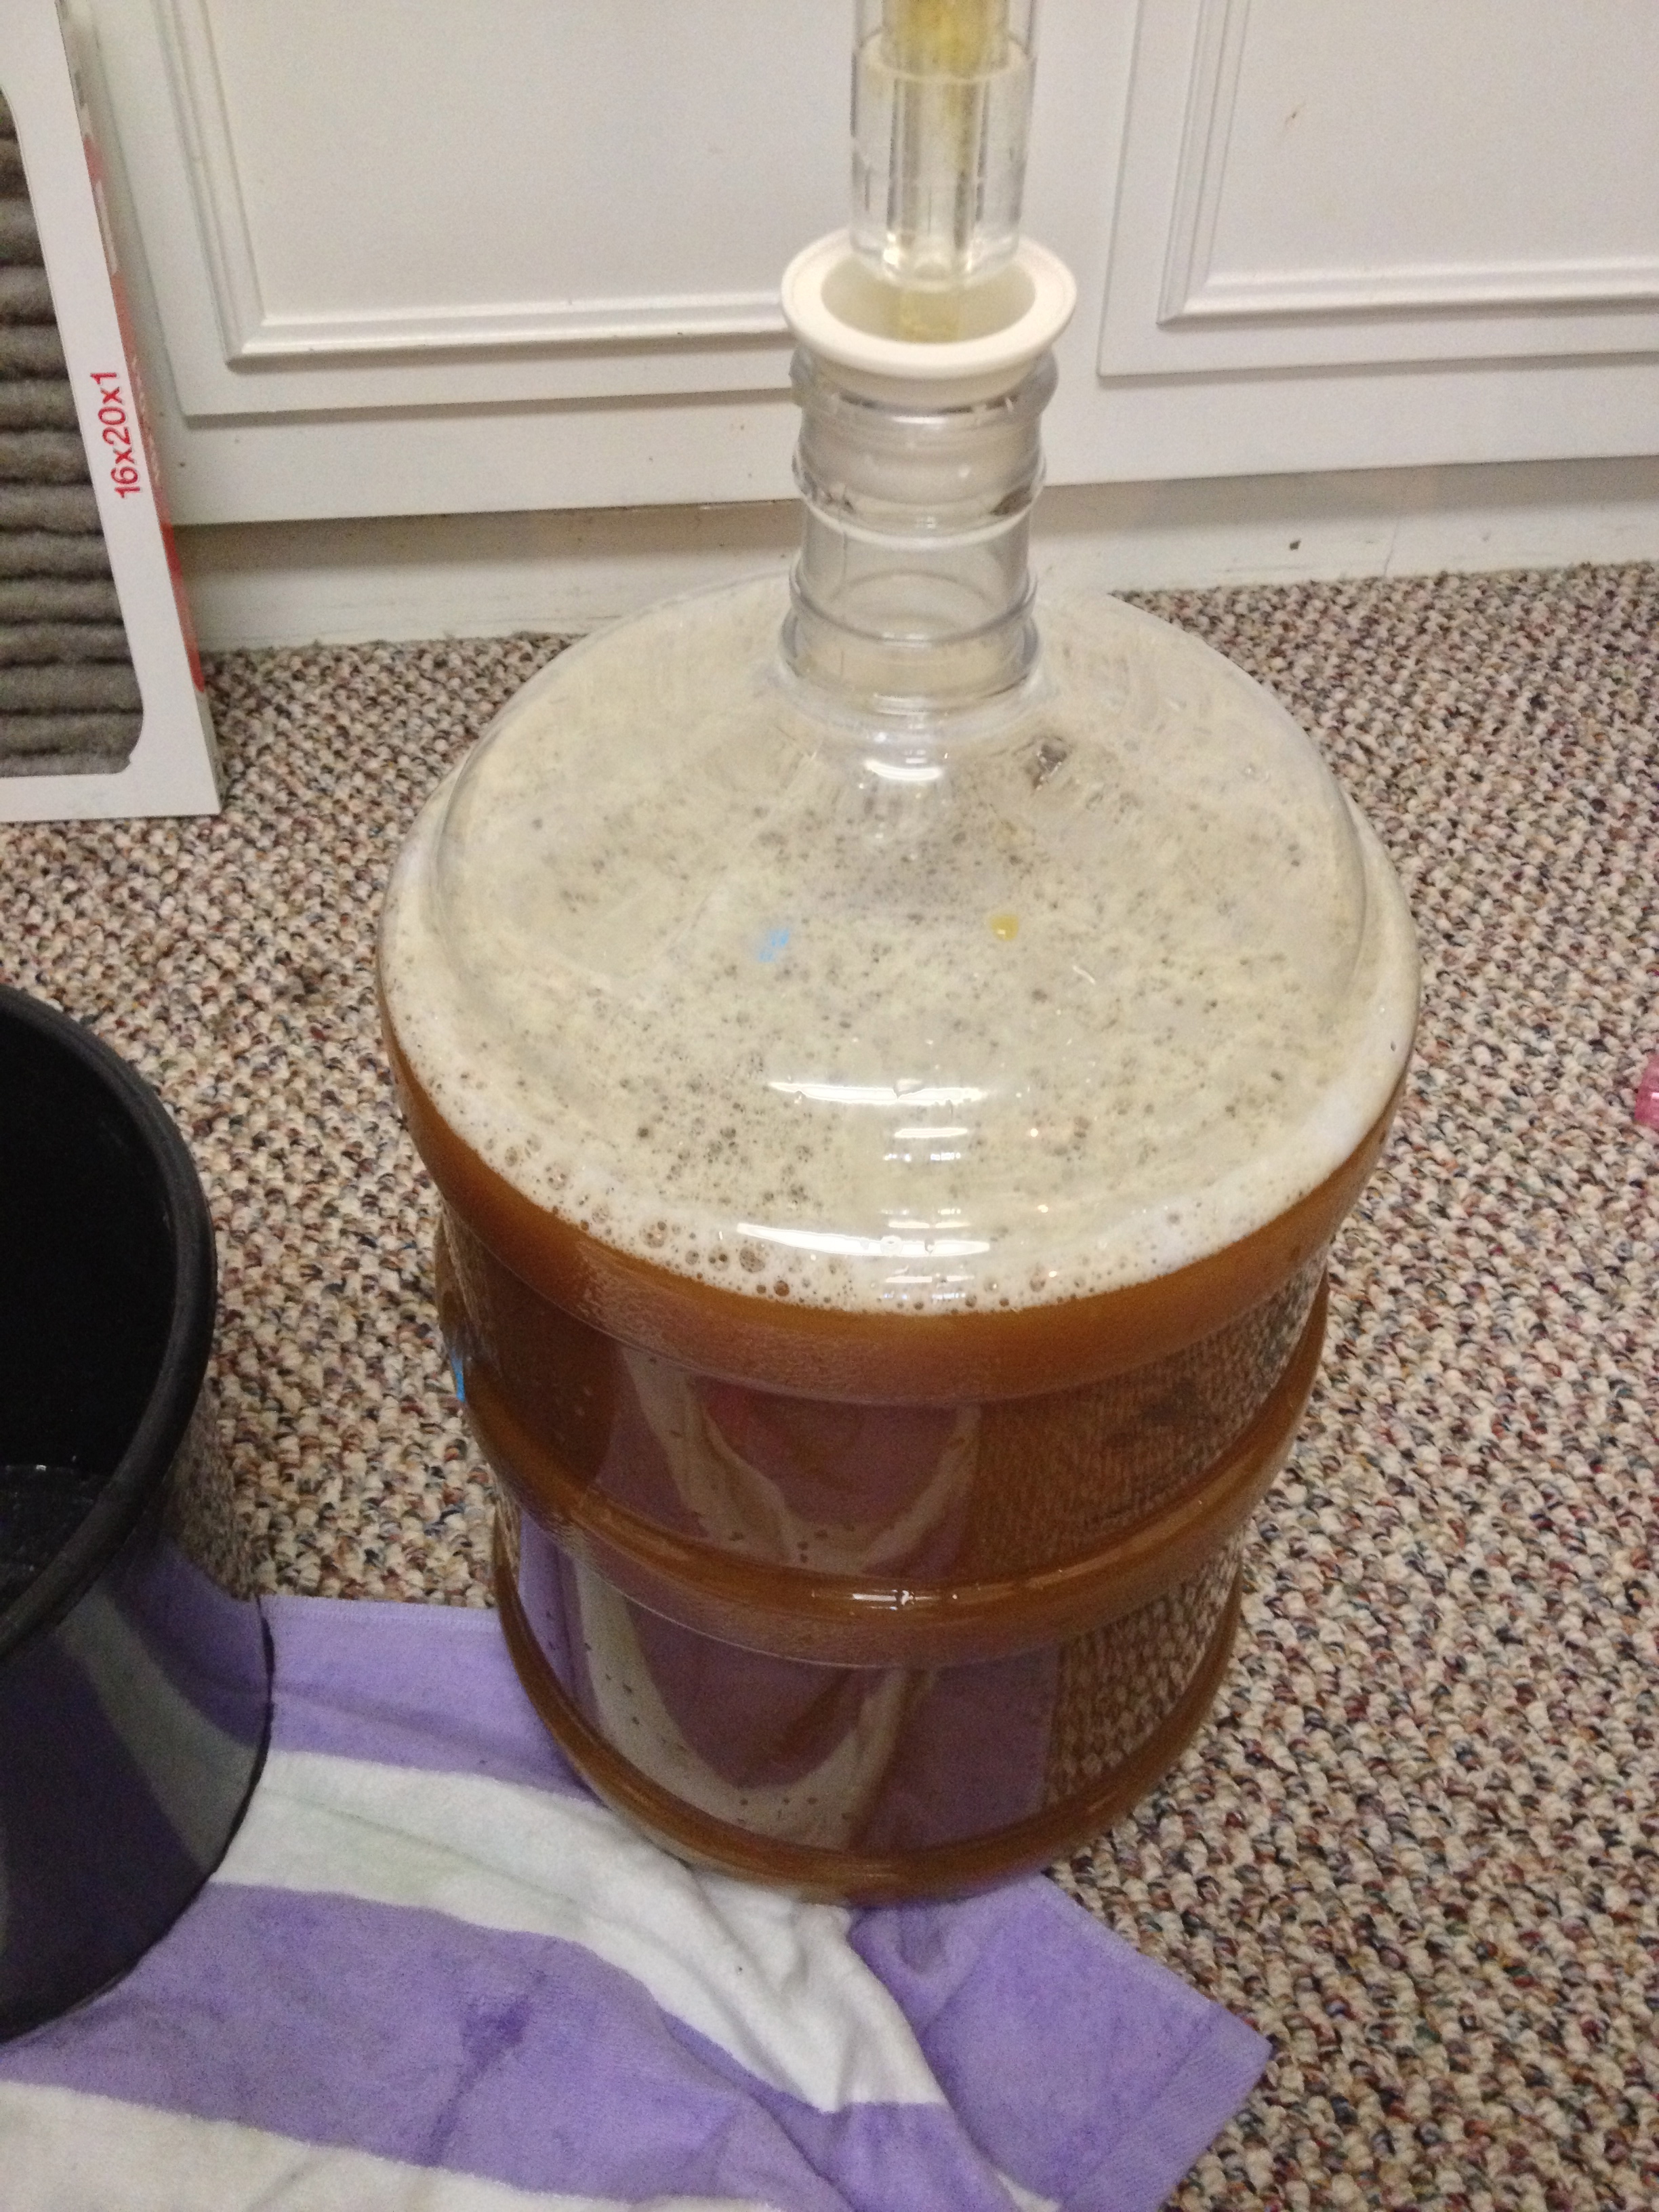 Some home brew beer I made